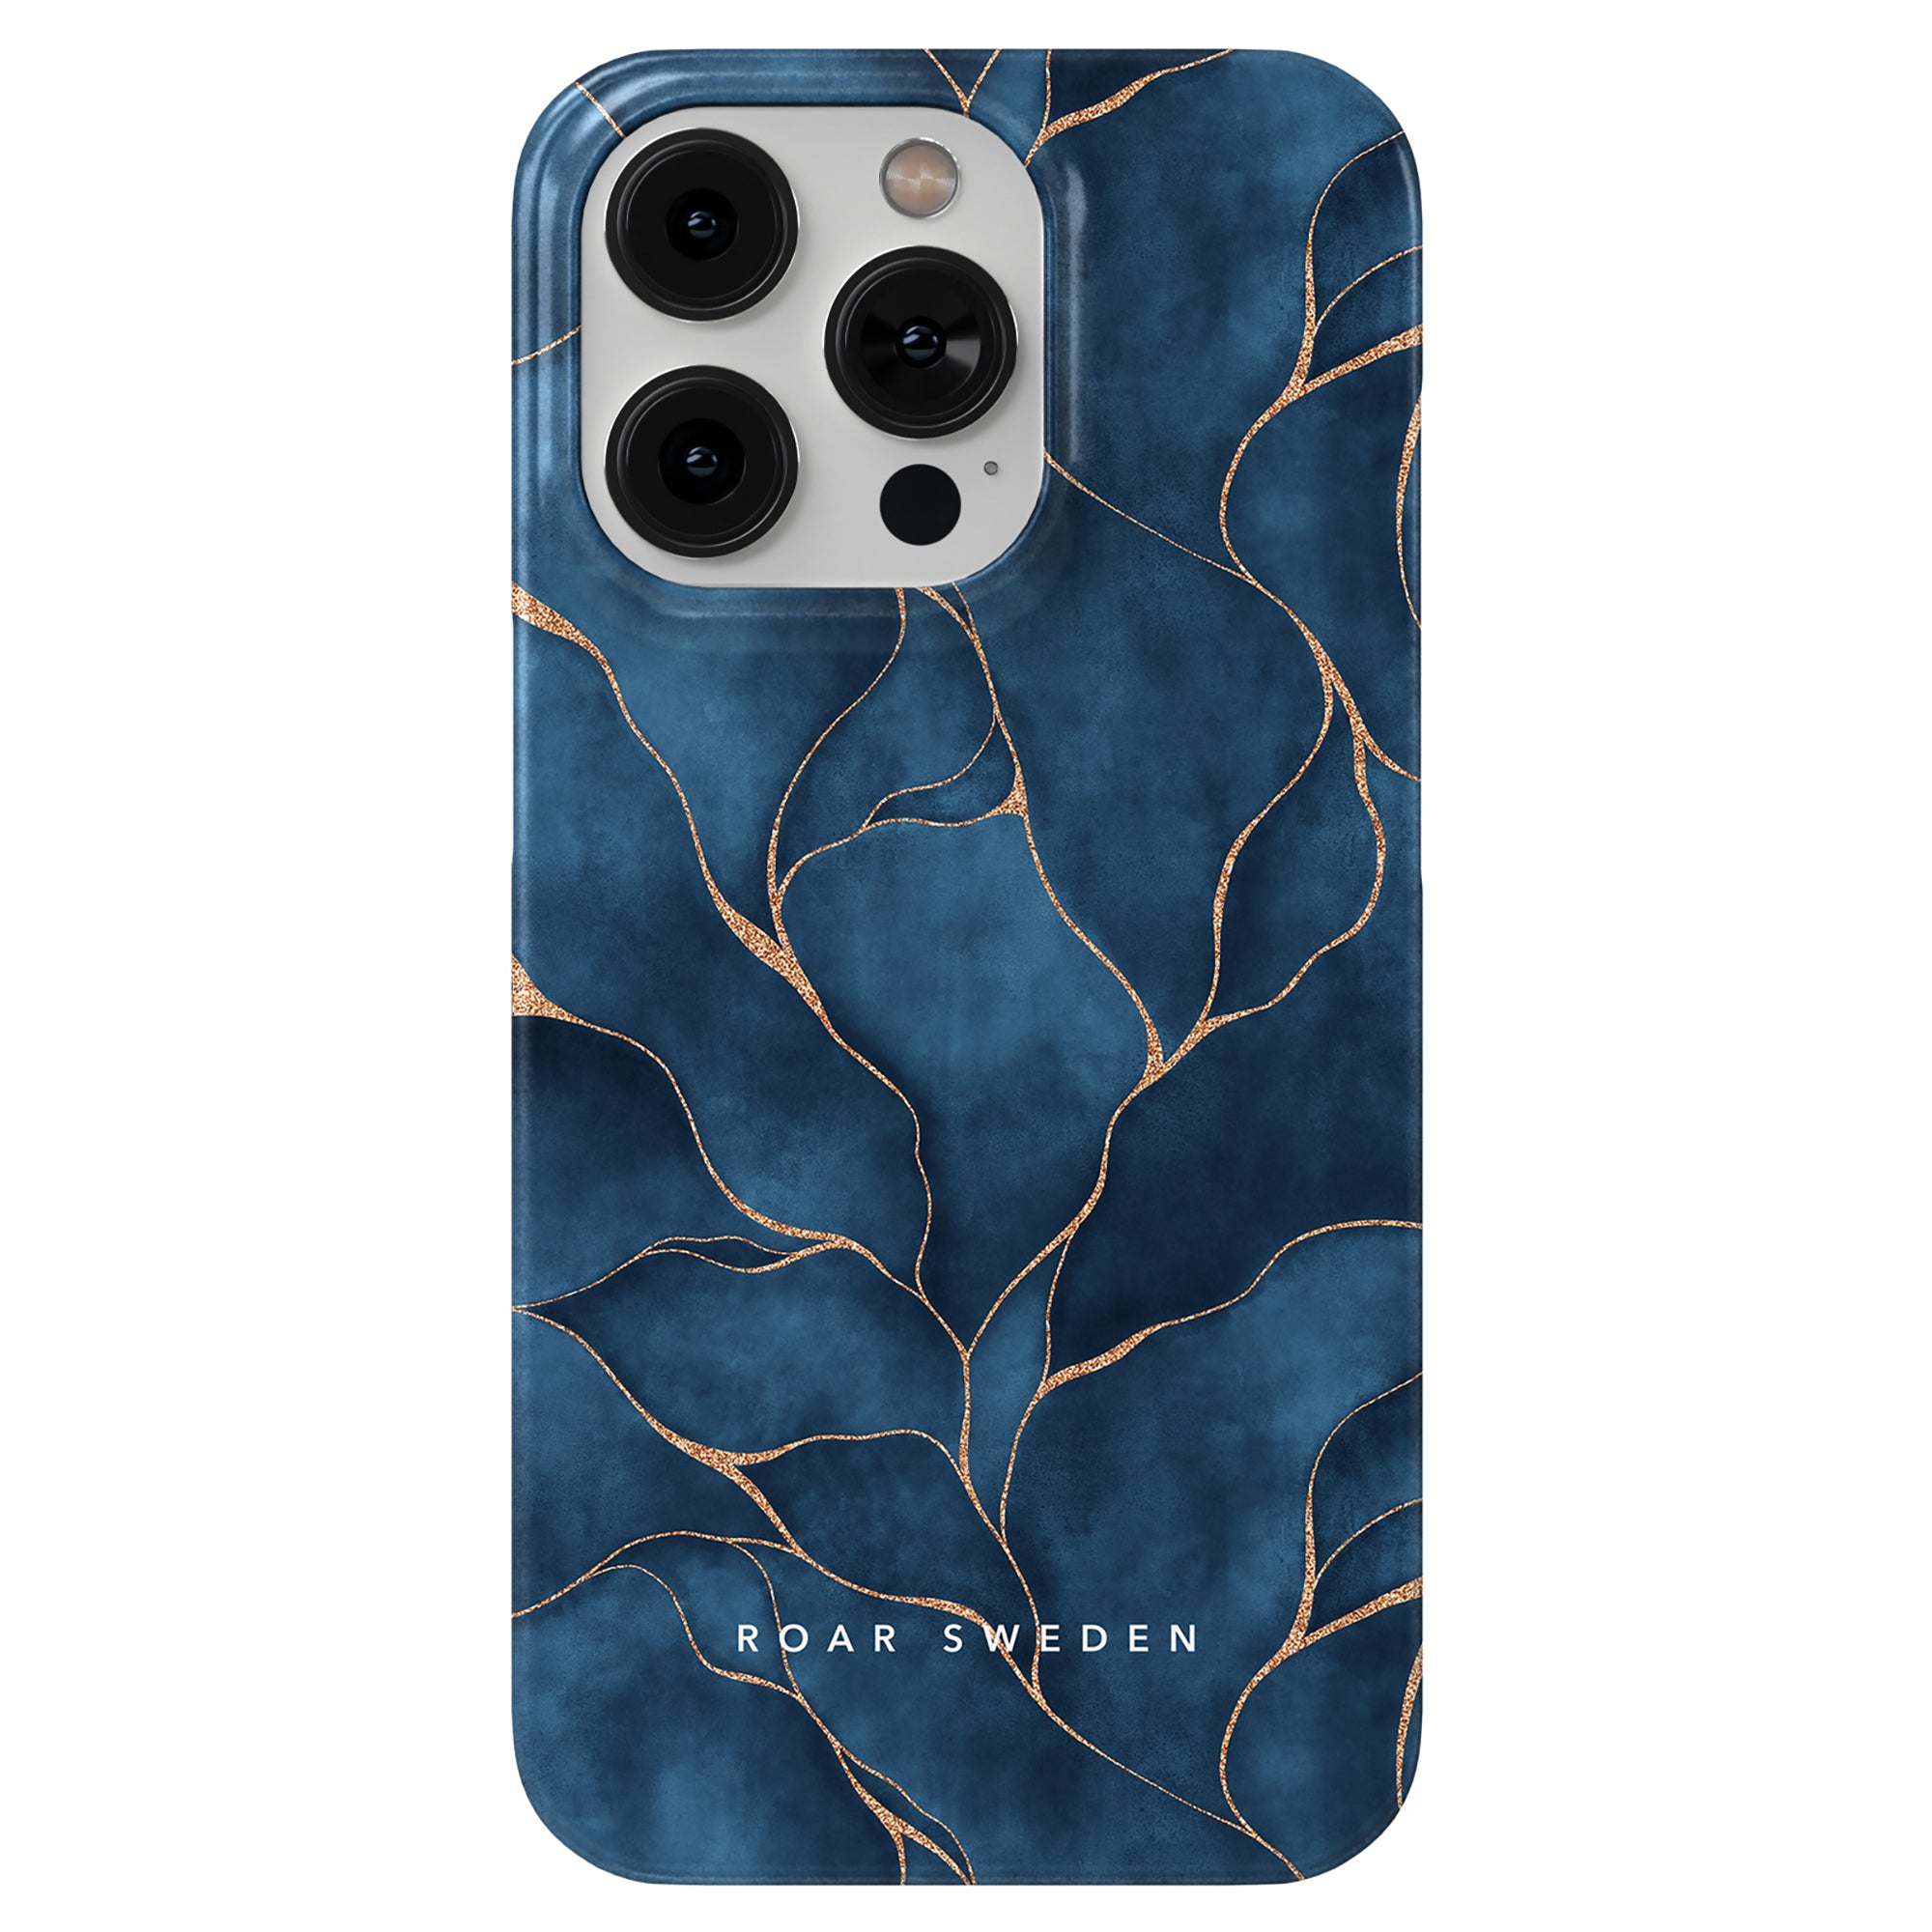 A Yggdrasil slim case adorned with gold leaves, inspired by the mythical Yggdrasil, perfect for your smartphone.